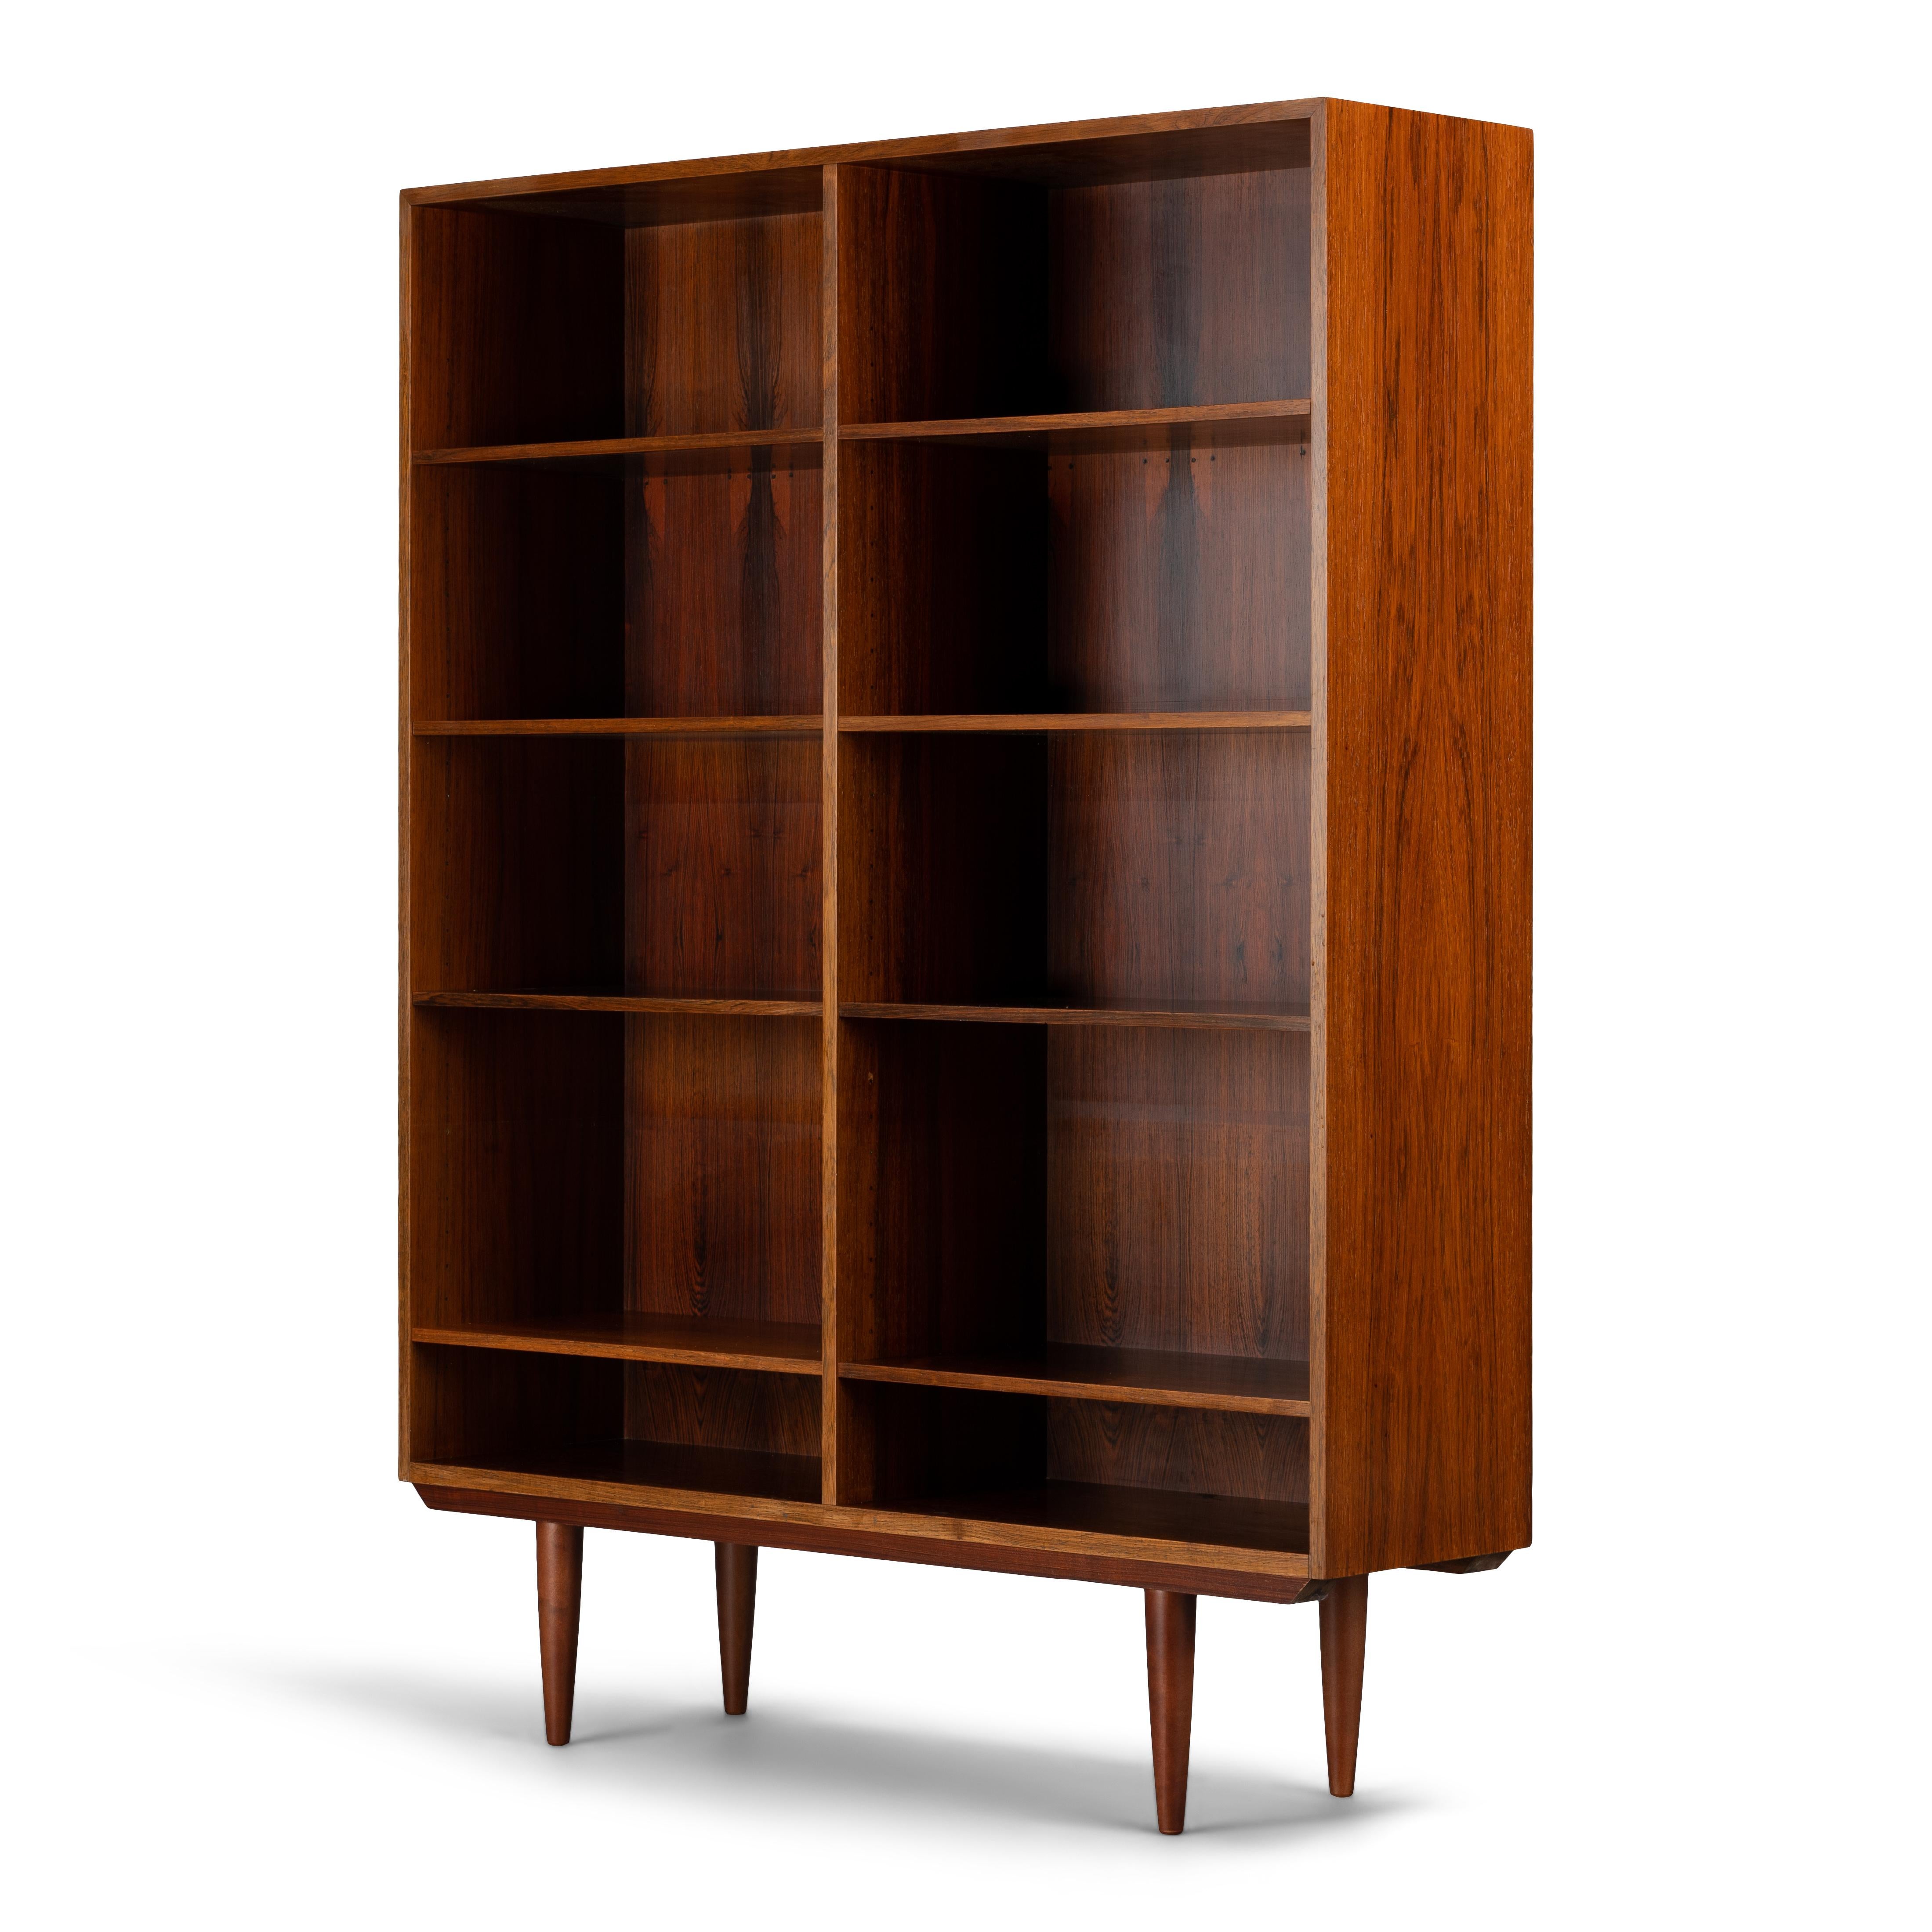 Danish midcentury bookcase in beautiful hardwood veneer by Brouer Møbelfabrik. This chest is in very good vintage condition with 8 in height adjustable shelves divided on the two halves of the book case.